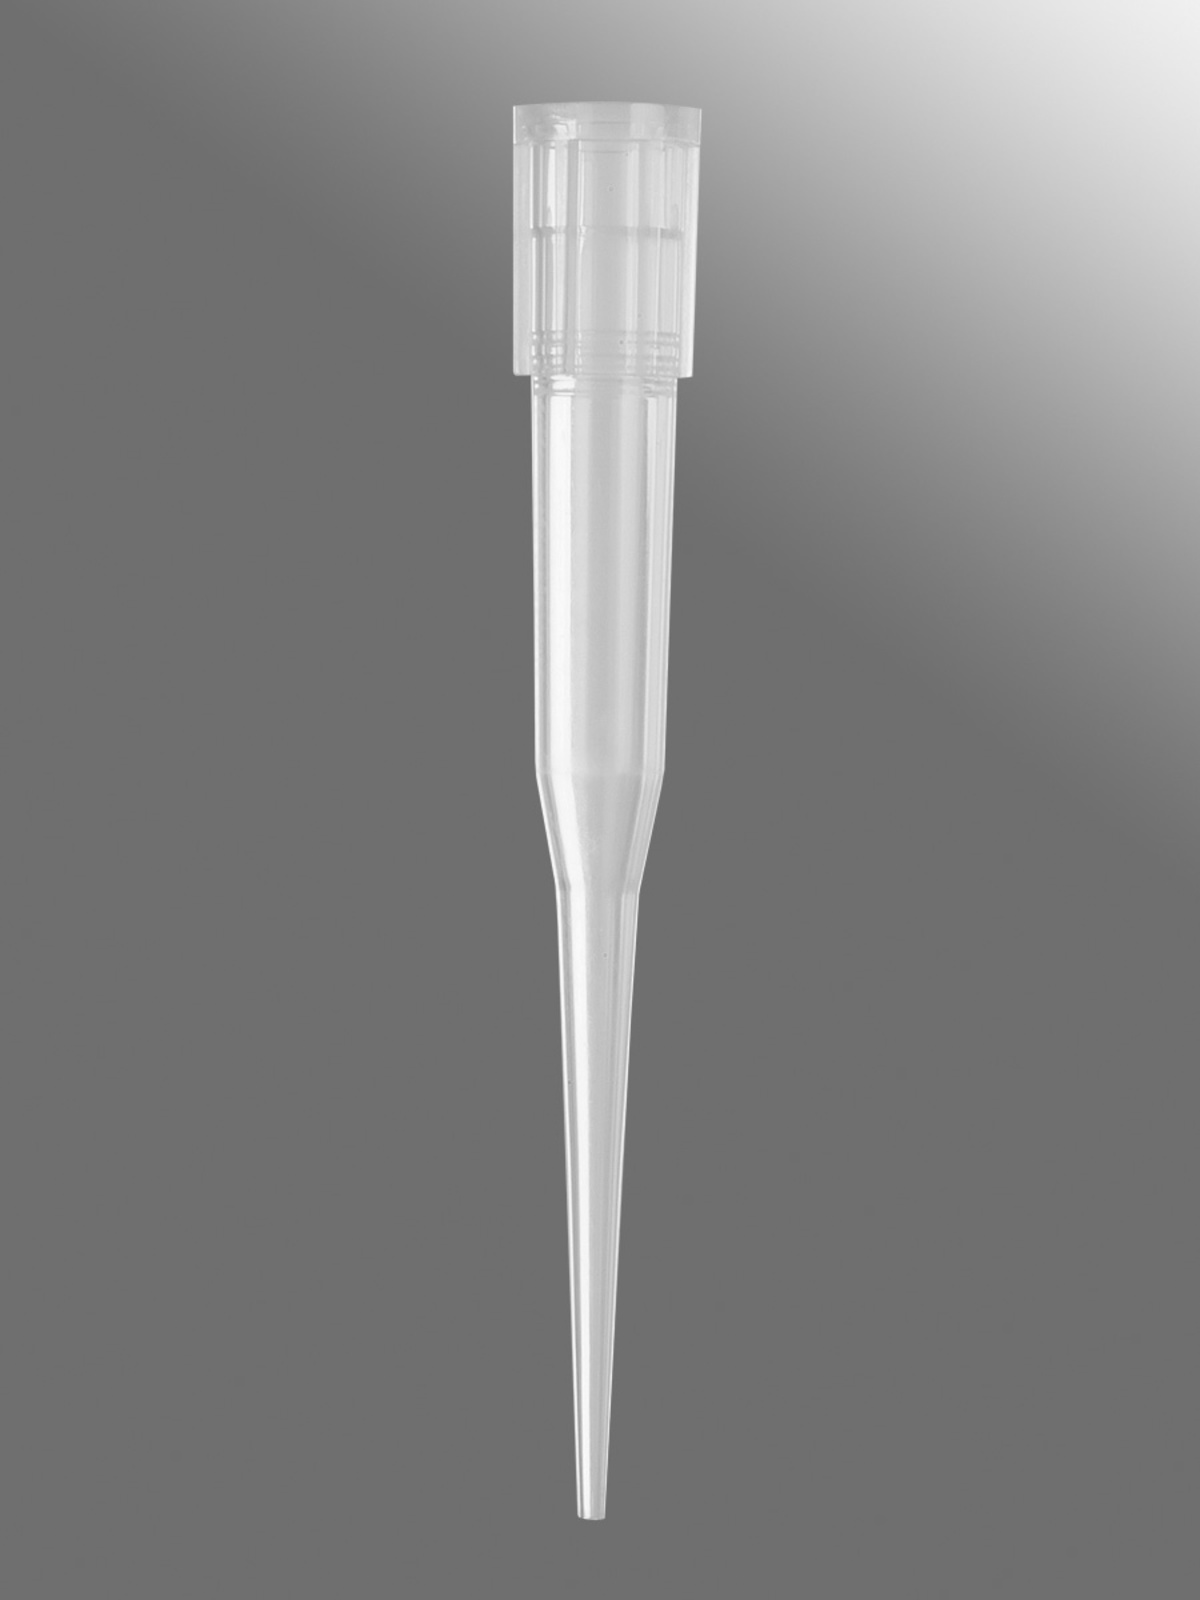 250ul Clear, Pre-Sterilized Pipet Tips for Beckman FX Robotics System.